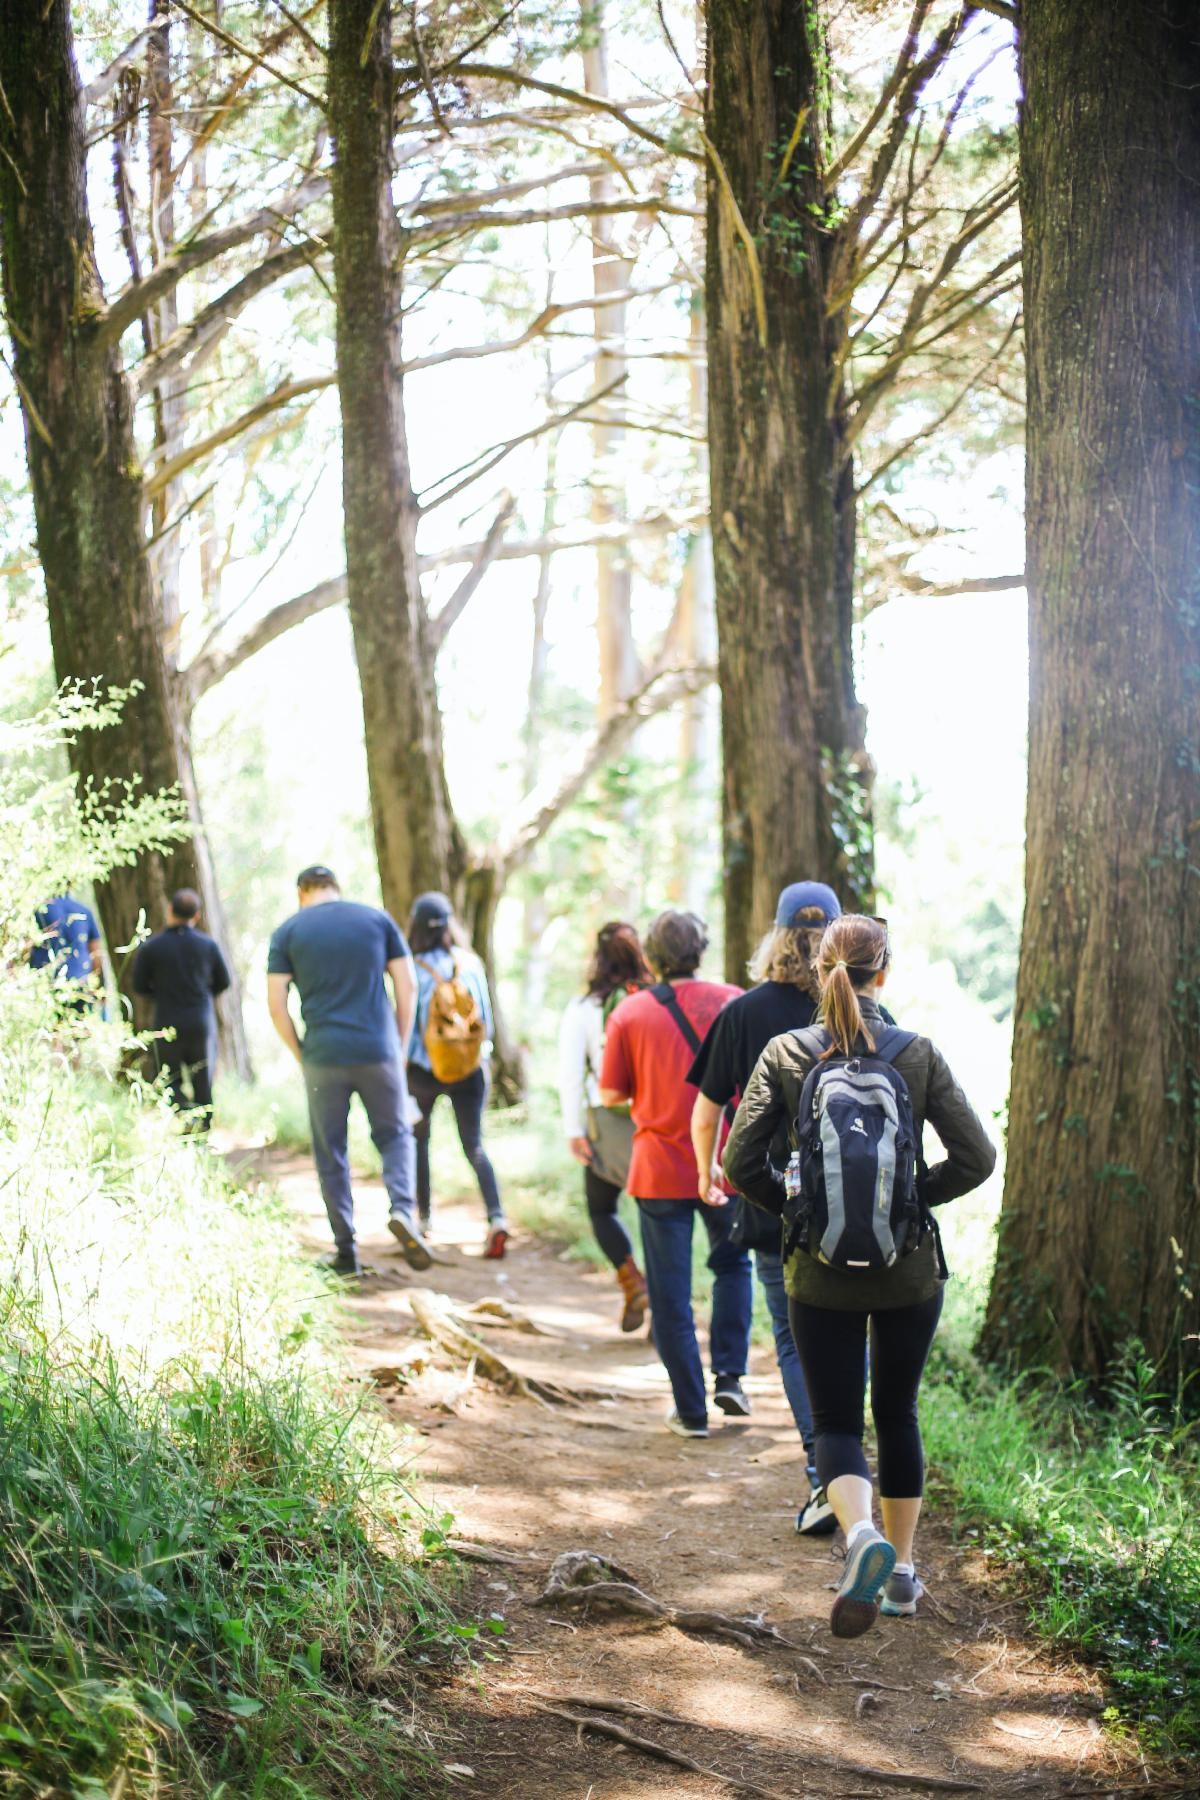 A group of people walking through a hiking path